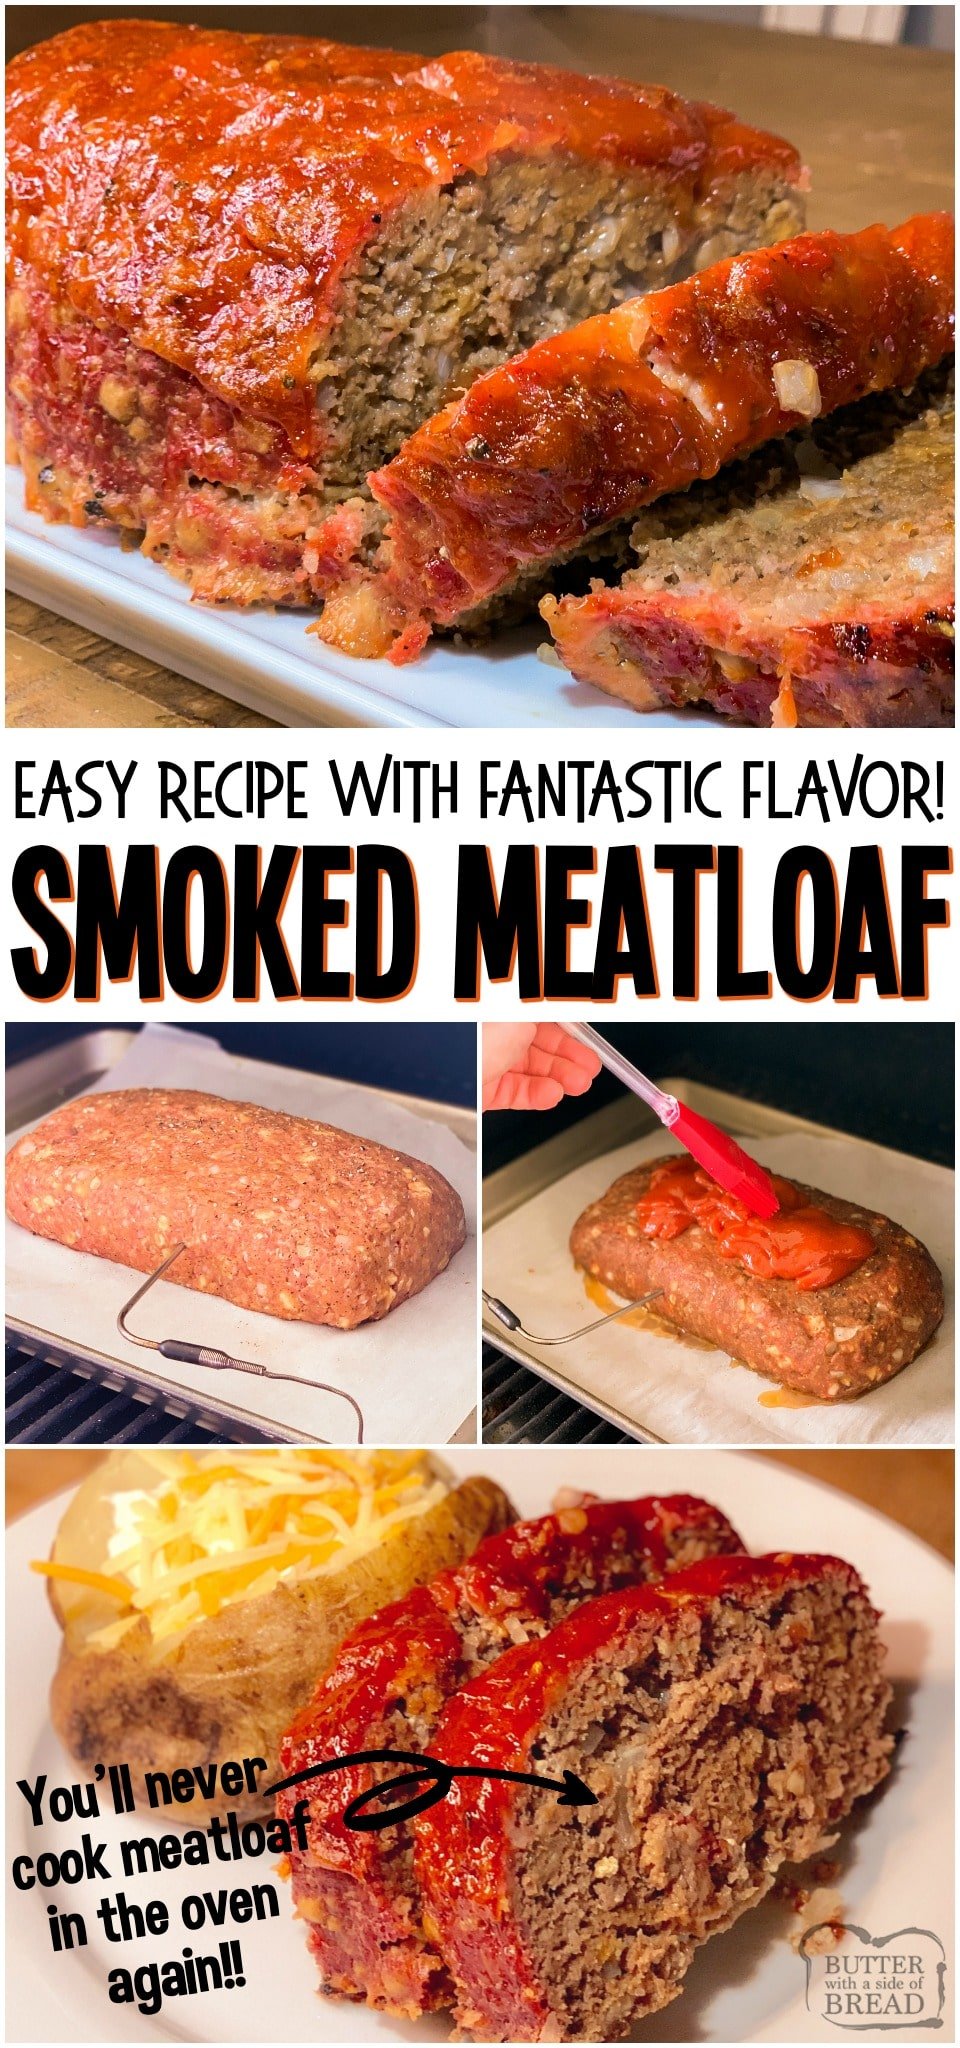 Easy Smoked Meatloaf made with common ingredients for a classic meatloaf recipe with incredible flavor! Take dinner up a notch with this meatloaf recipe cooked in a smoker.